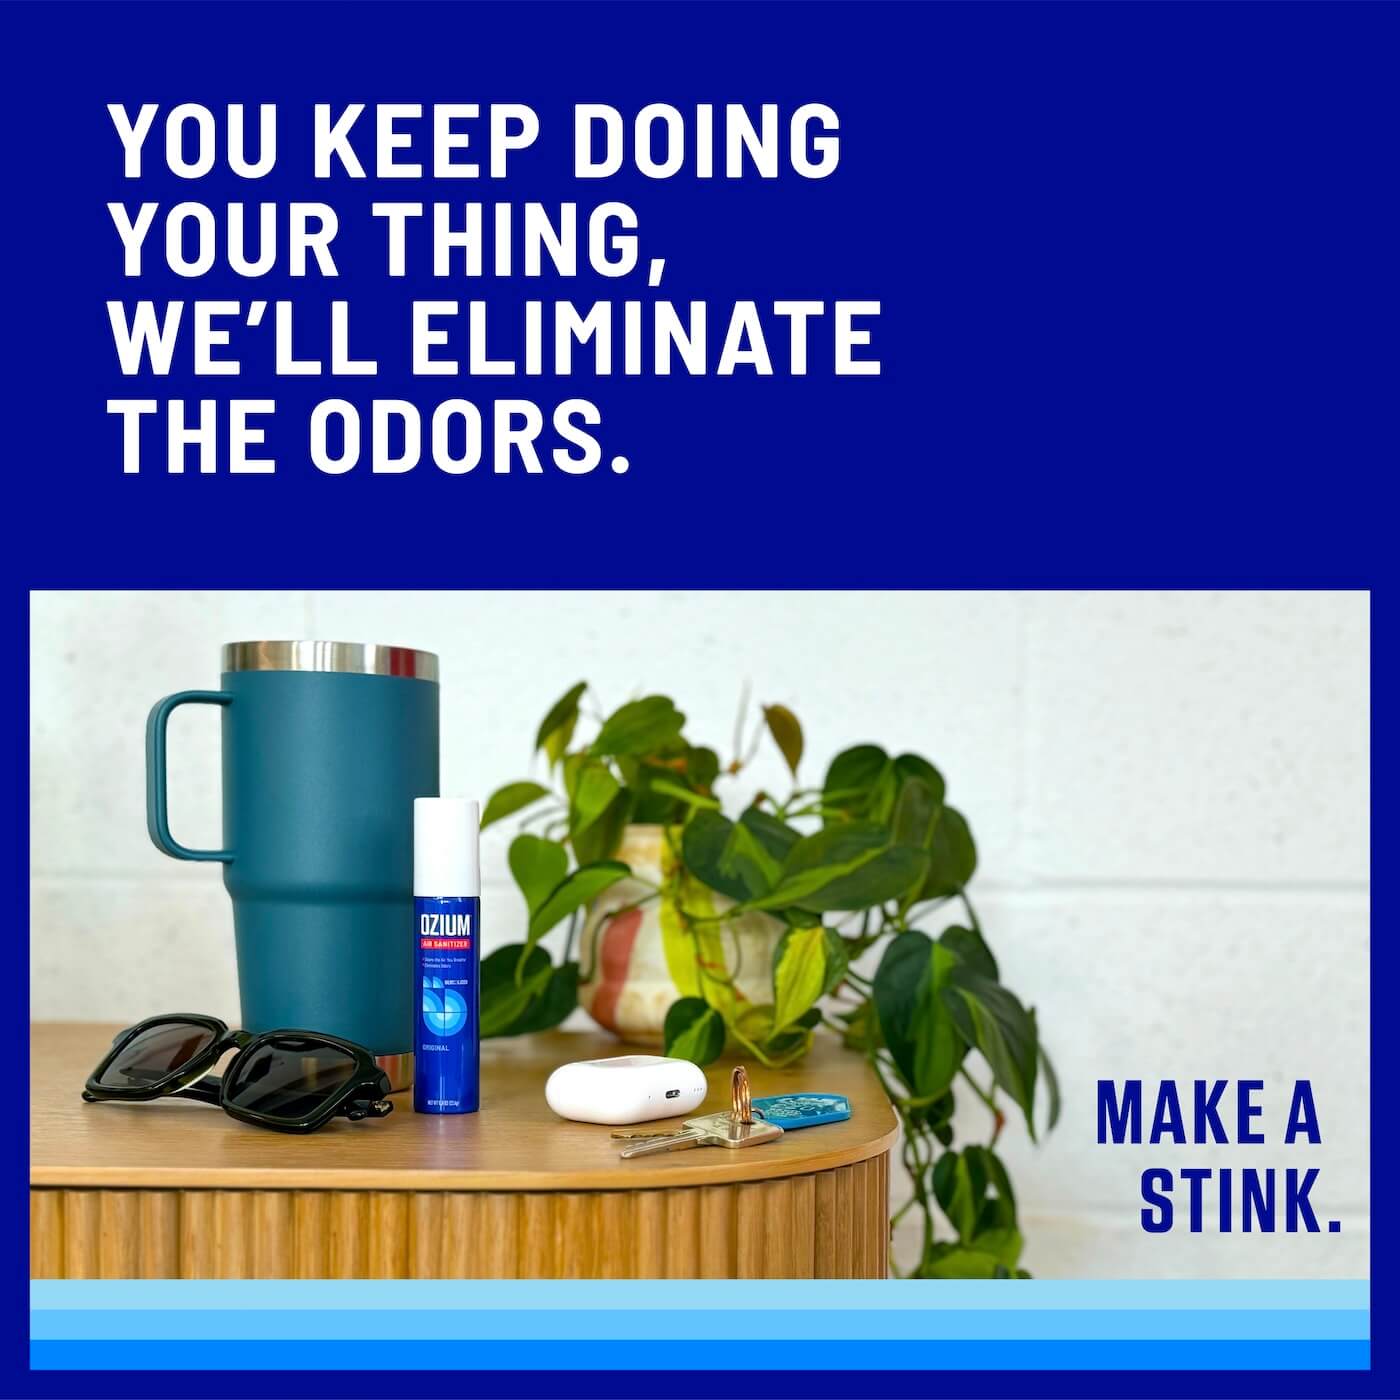 You keep doing your thing, we'll eliminate the odors. Image of Ozium next to coffee mug and sunglasses.